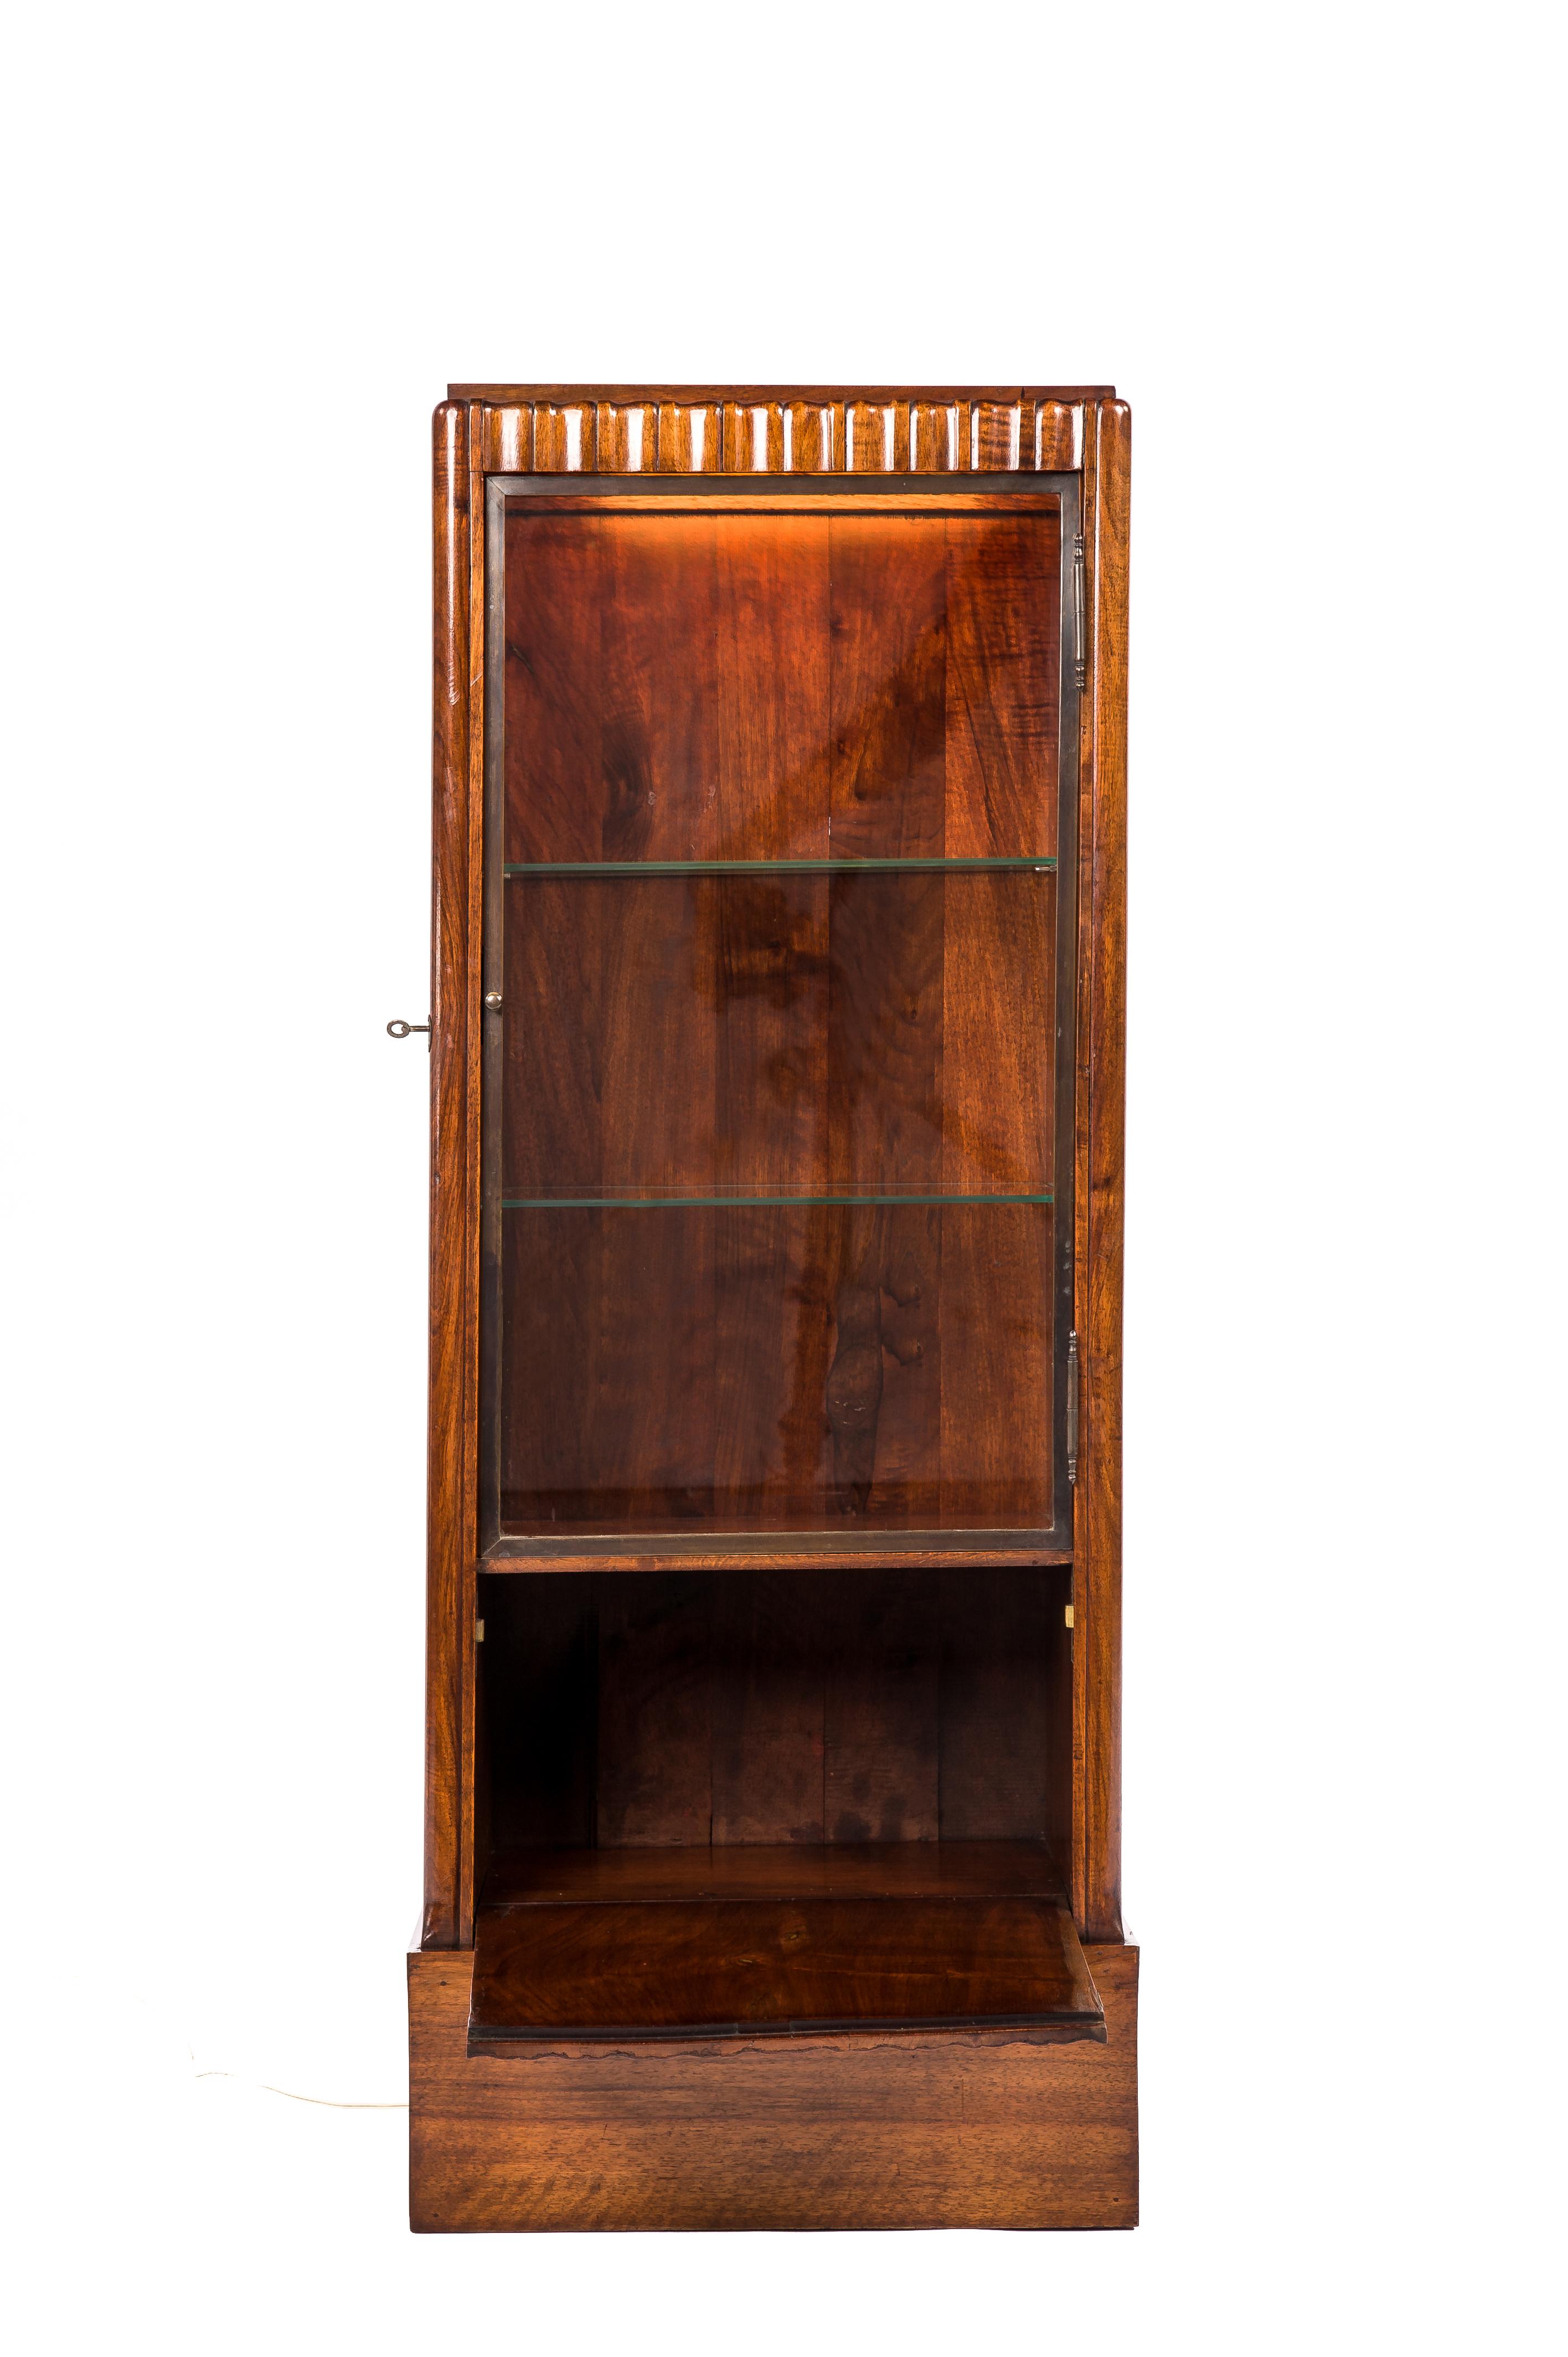 This beautiful proportioned fluted dry bar or liquor cabinet was made in the Netherlands circa 1920. It is a freestanding piece that is elegantly fluted with convex-concave teak slats throughout. On the front, the cabinet has a clean glazed door